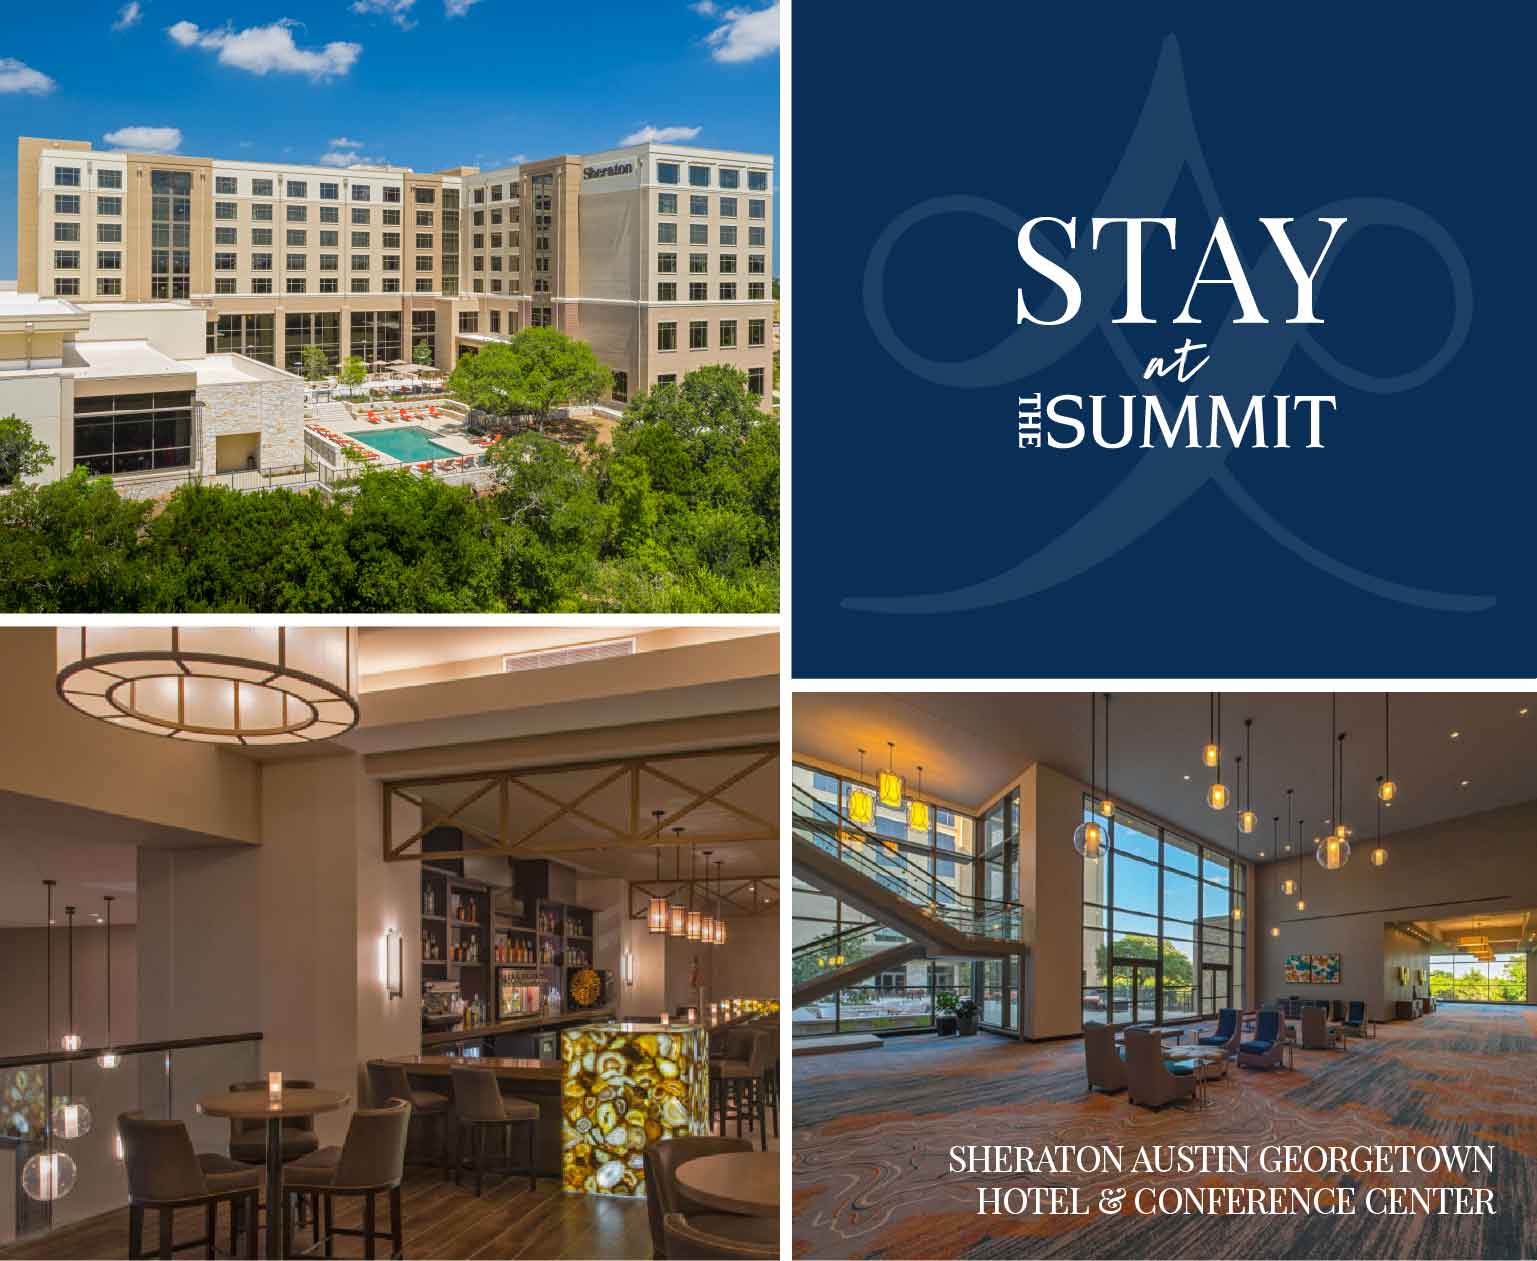 Stay at The Summit - Sheraton Austin Georgetown